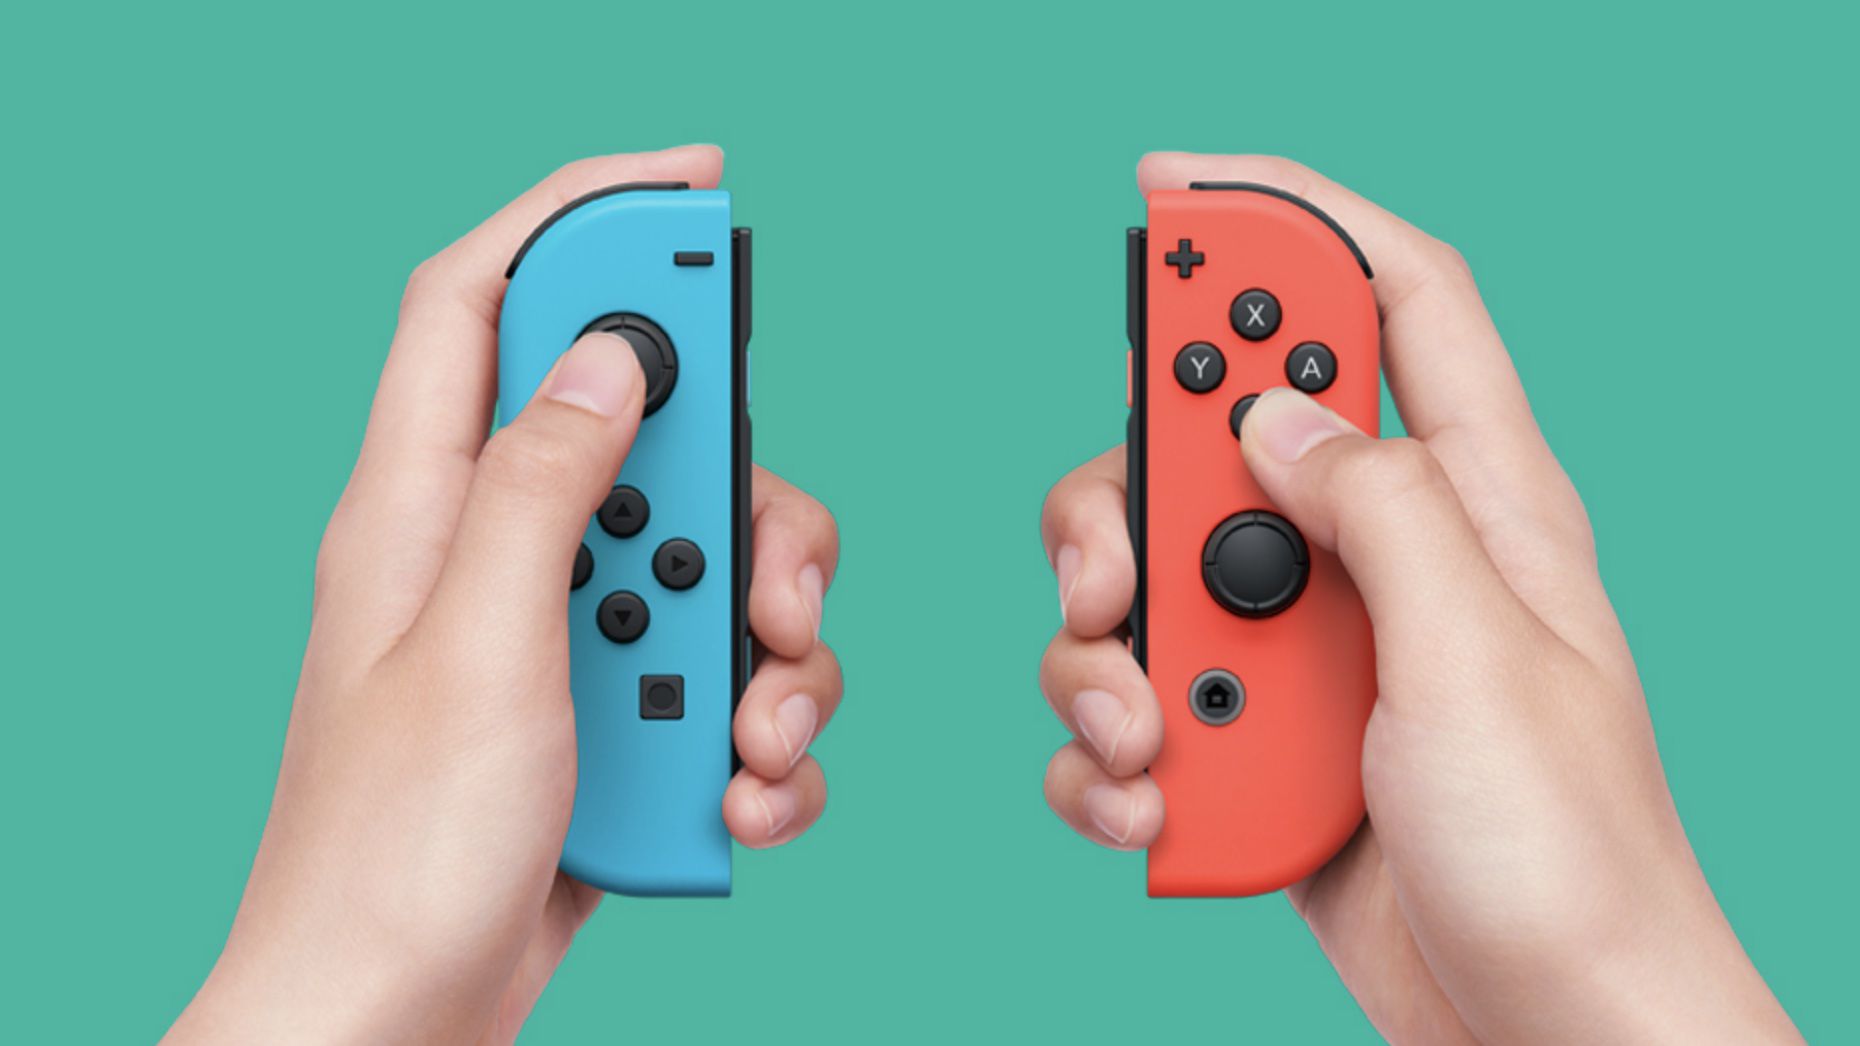 iOS 16 Adds Support for Nintendo Switch's Joy-Cons and Pro Controller